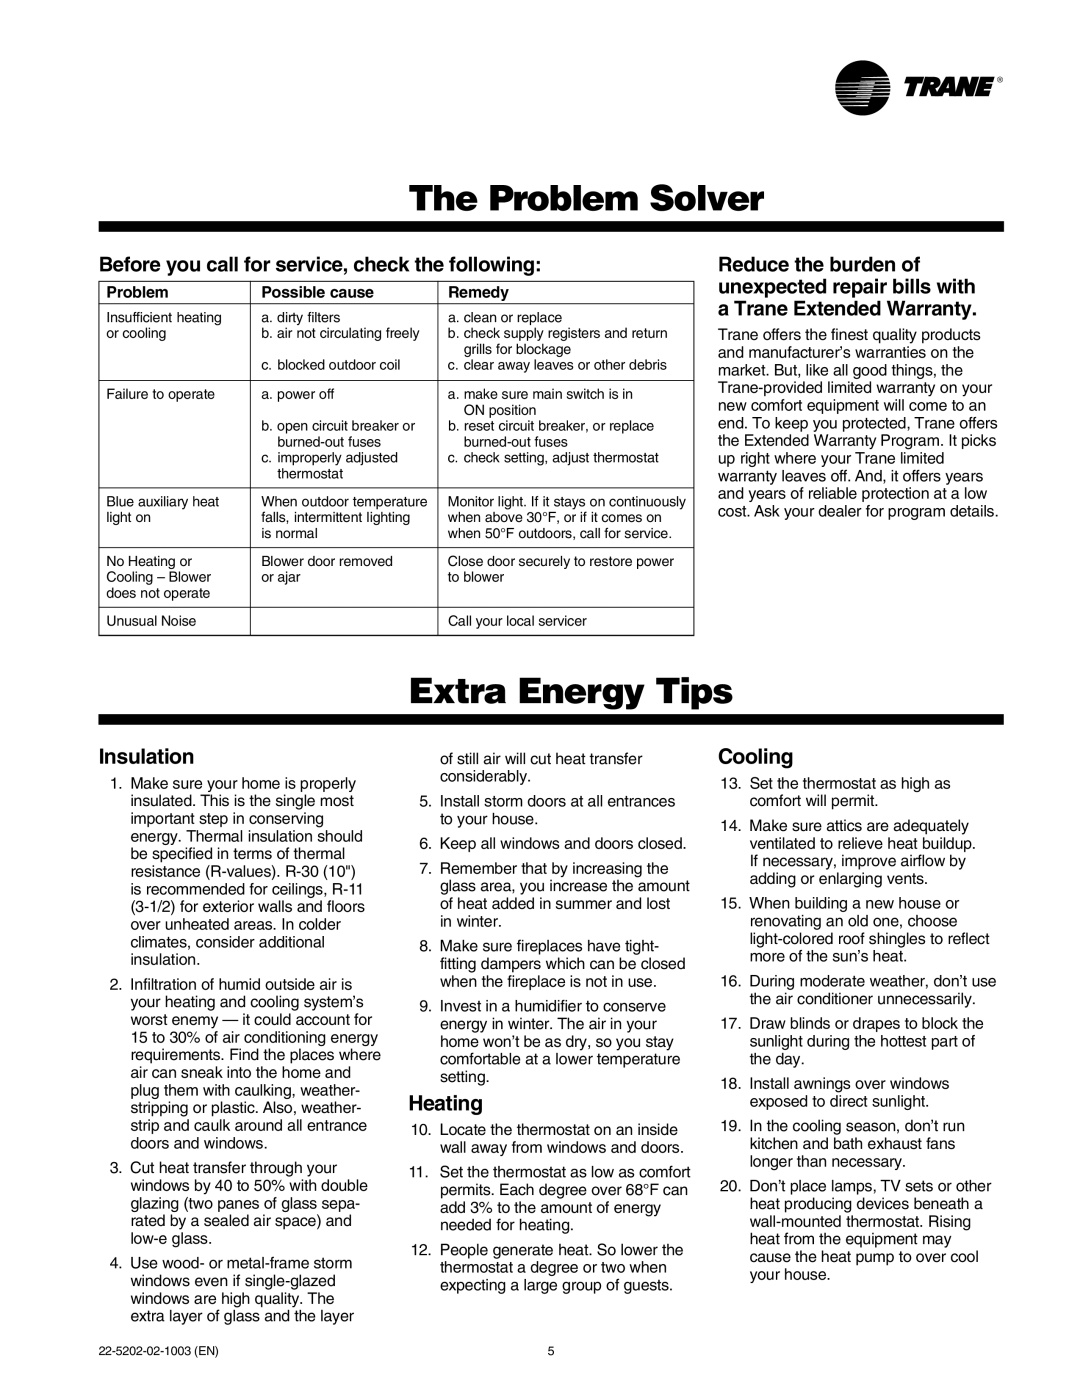 Trane 2TWB-SVU01A-EN manual The Problem Solver, Extra Energy Tips, Insulation, Heating, Cooling, Possible cause, Remedy 